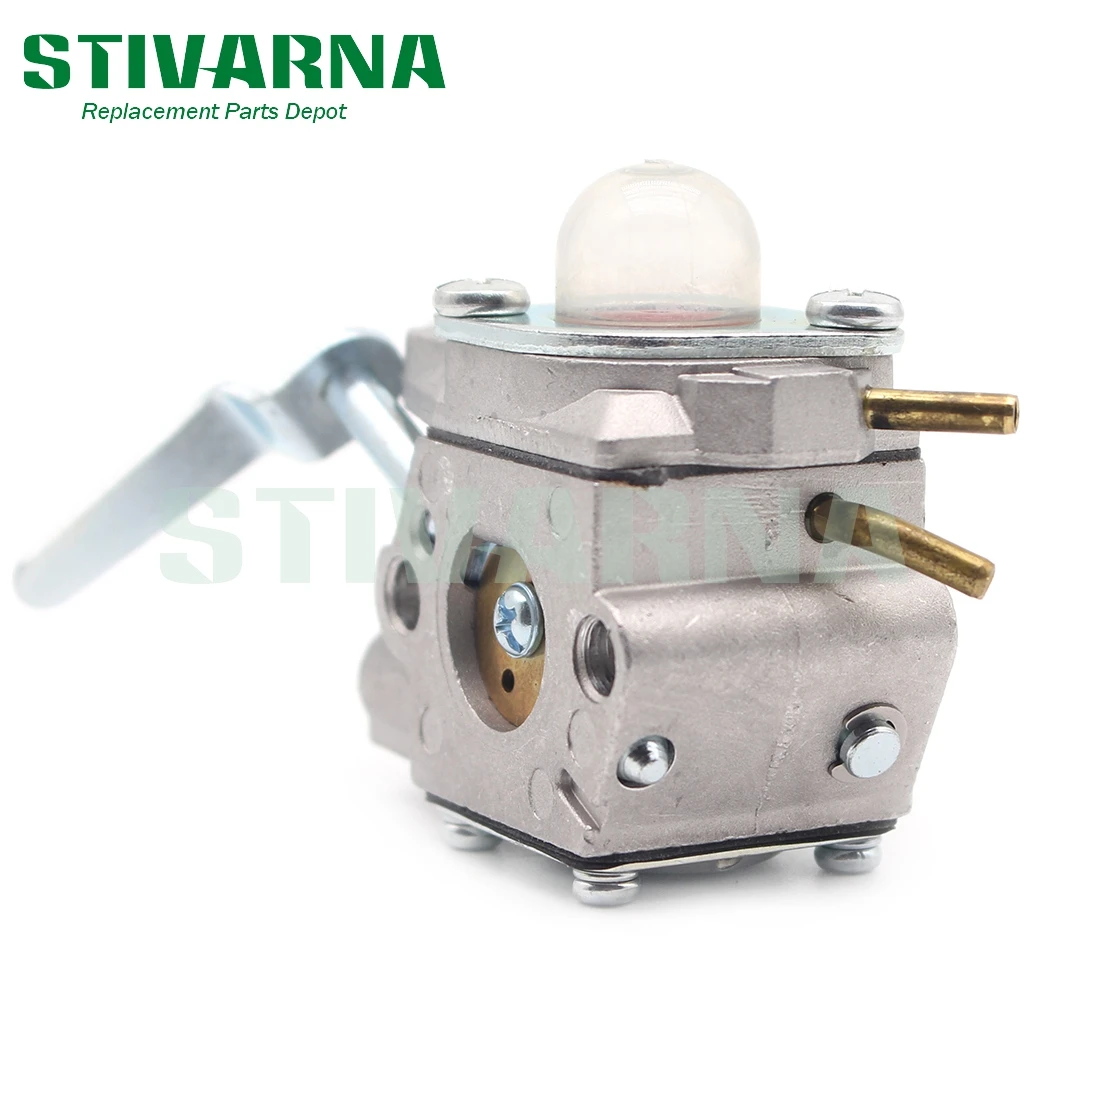 Details about   Carburetor Carb For Weed Eater PE550 GE21 Gas Edger 530071634 530069654 WT-630 